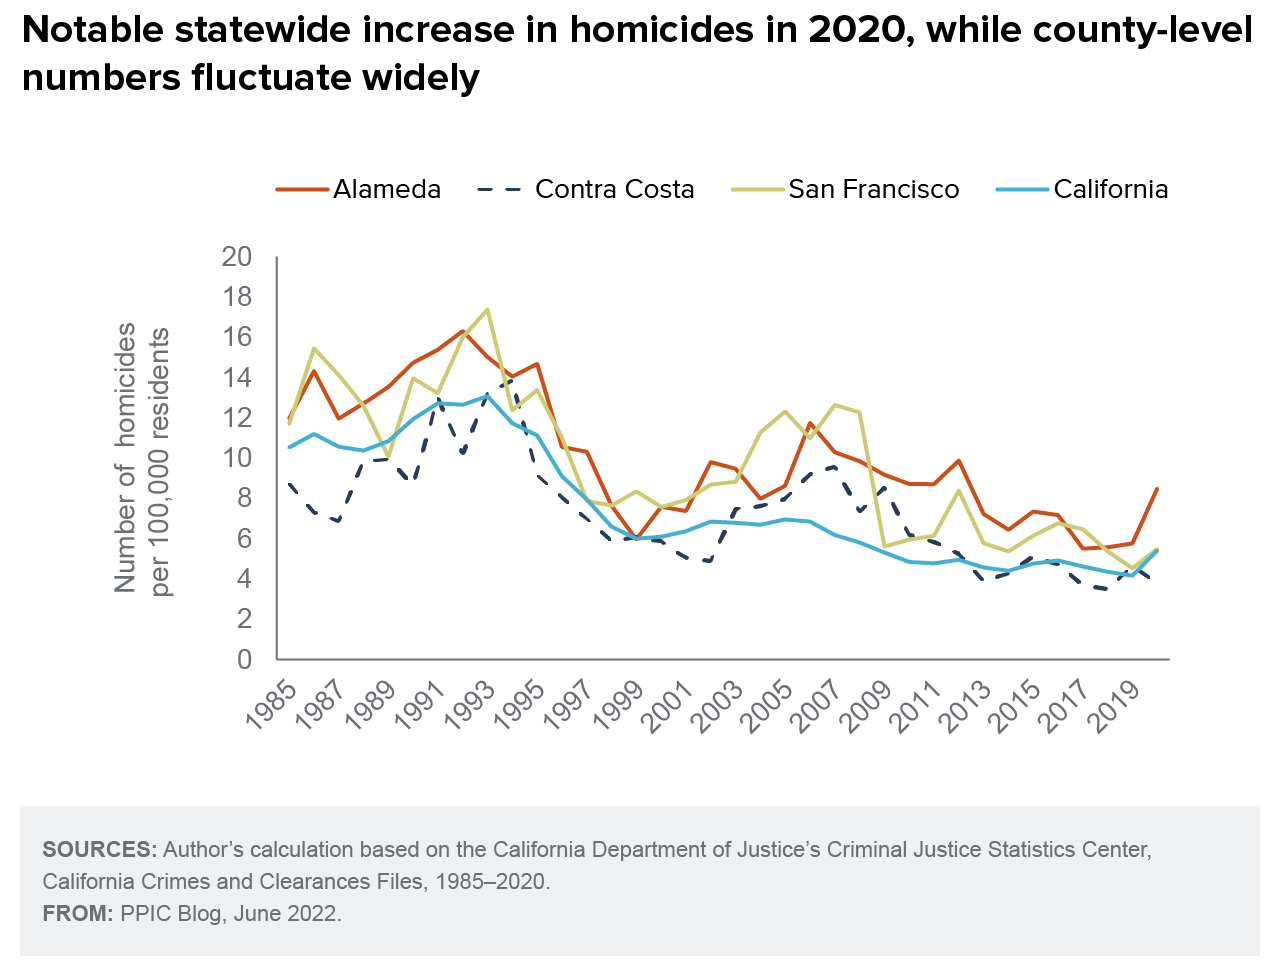 figure - Notable statewide increase in homicides in 2020, while county-level numbers fluctuate widely